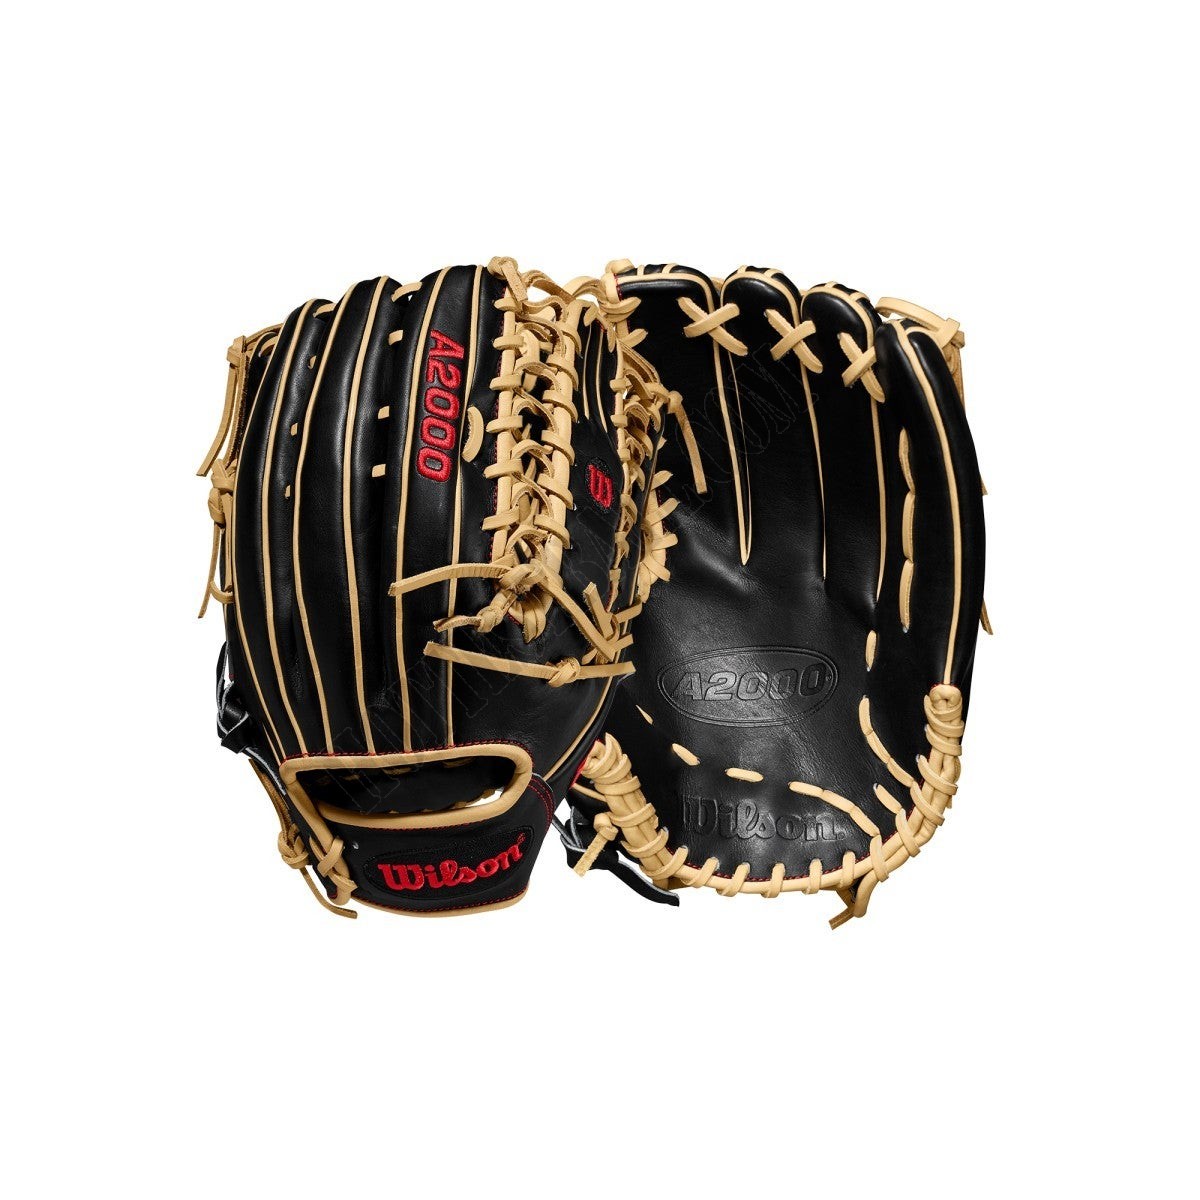 2020 A2000 OT6 12.75" Outfield Baseball Glove ● Wilson Promotions - 2020 A2000 OT6 12.75" Outfield Baseball Glove ● Wilson Promotions